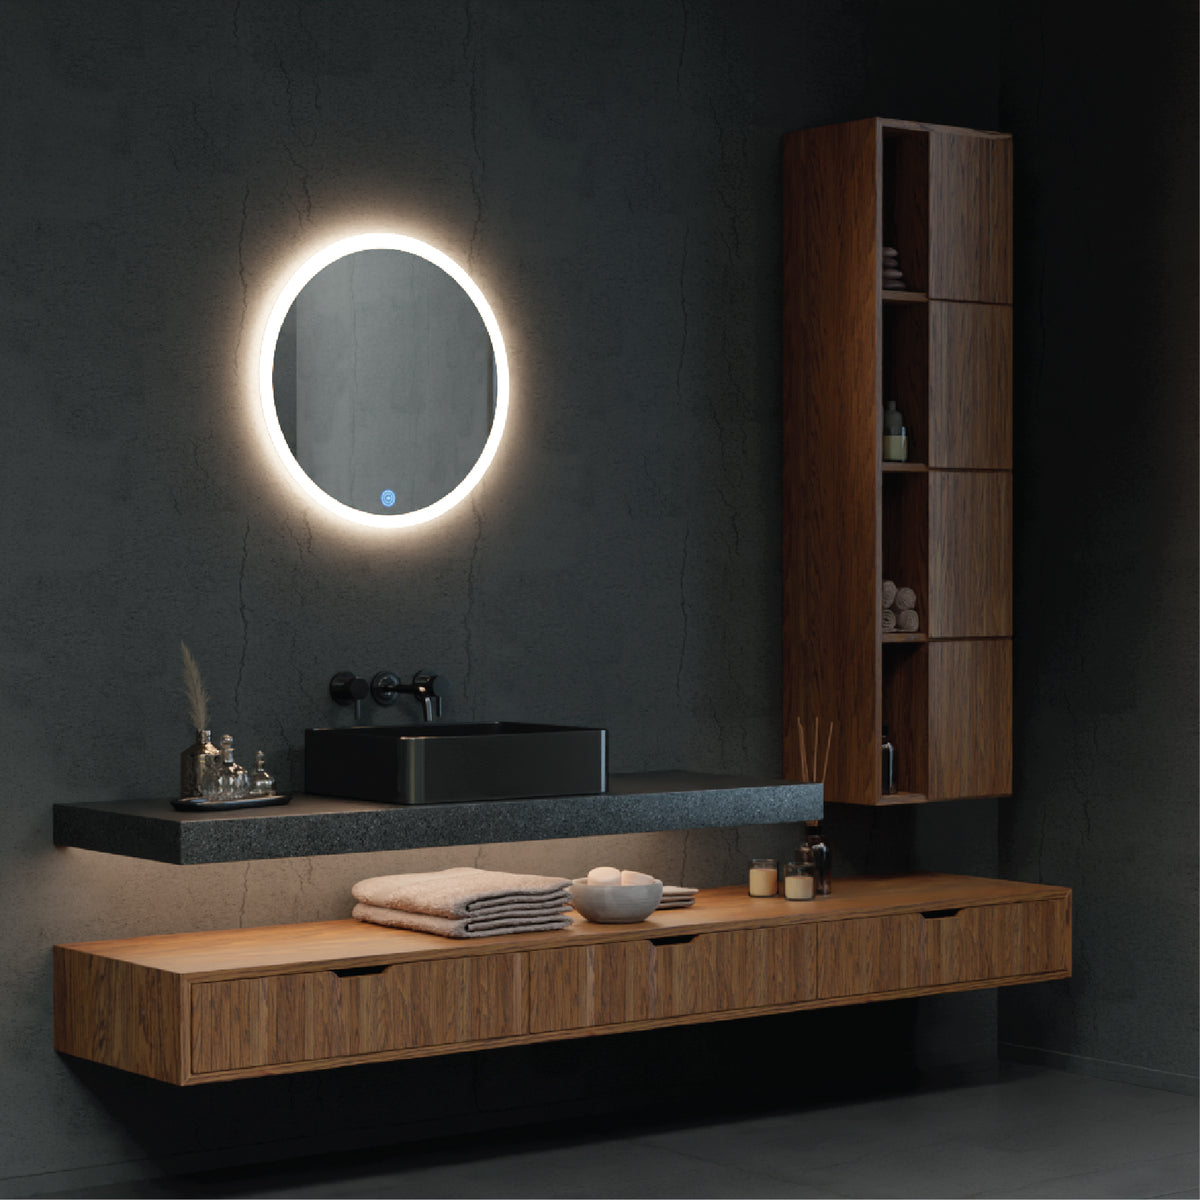 Transform your bathroom into a haven of sophistication with the Titan LED Mirror's combination of functionality and stylish design.